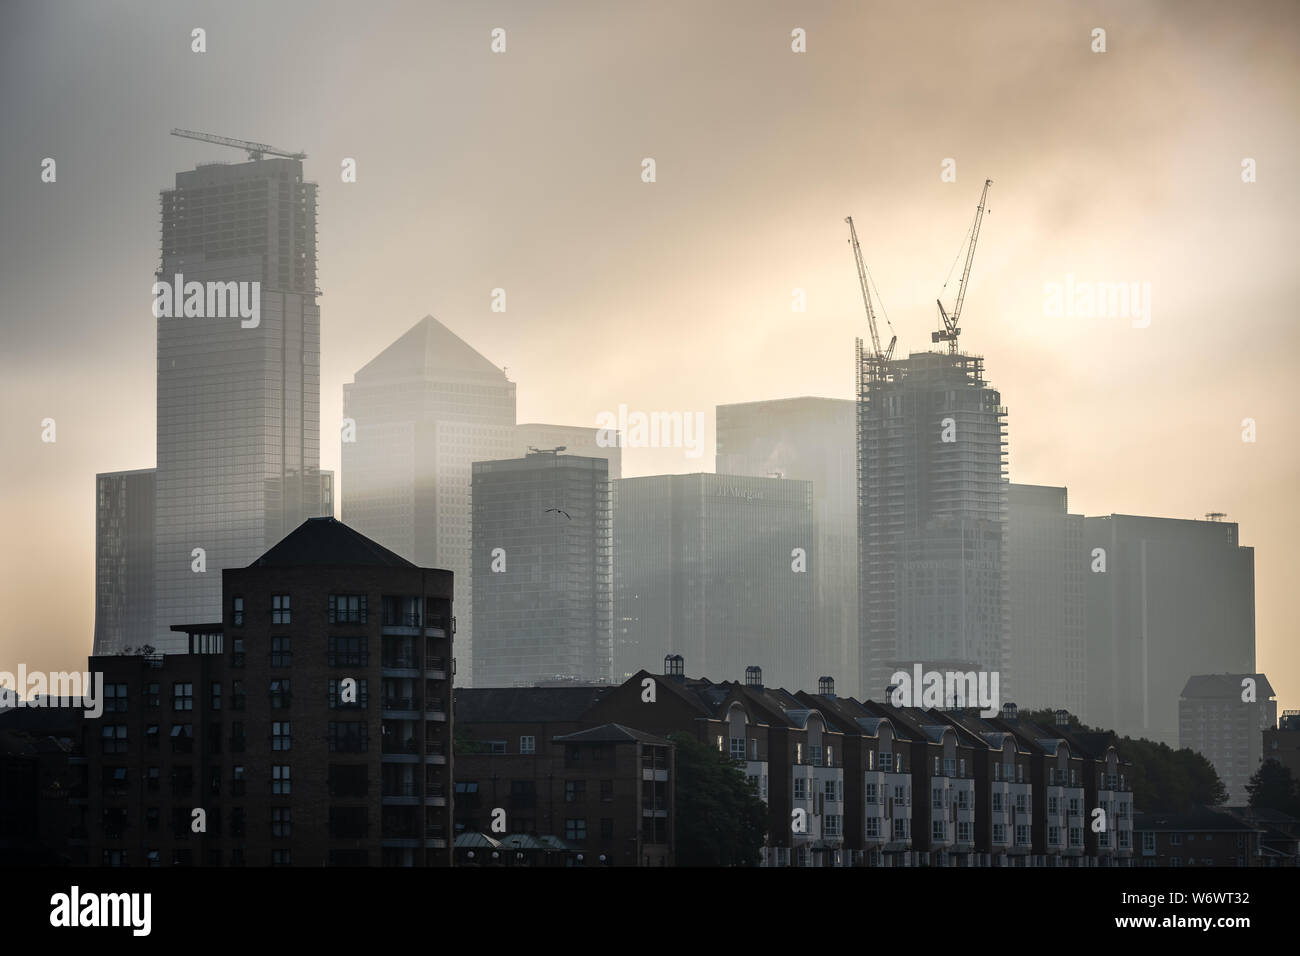 London, UK. 2nd August, 2019. UK Weather: Dramatic morning light breaks over Canary Wharf business park buildings - seen from Greenland Dock, Surrey Quays. Credit: Guy Corbishley/Alamy Live News Stock Photo